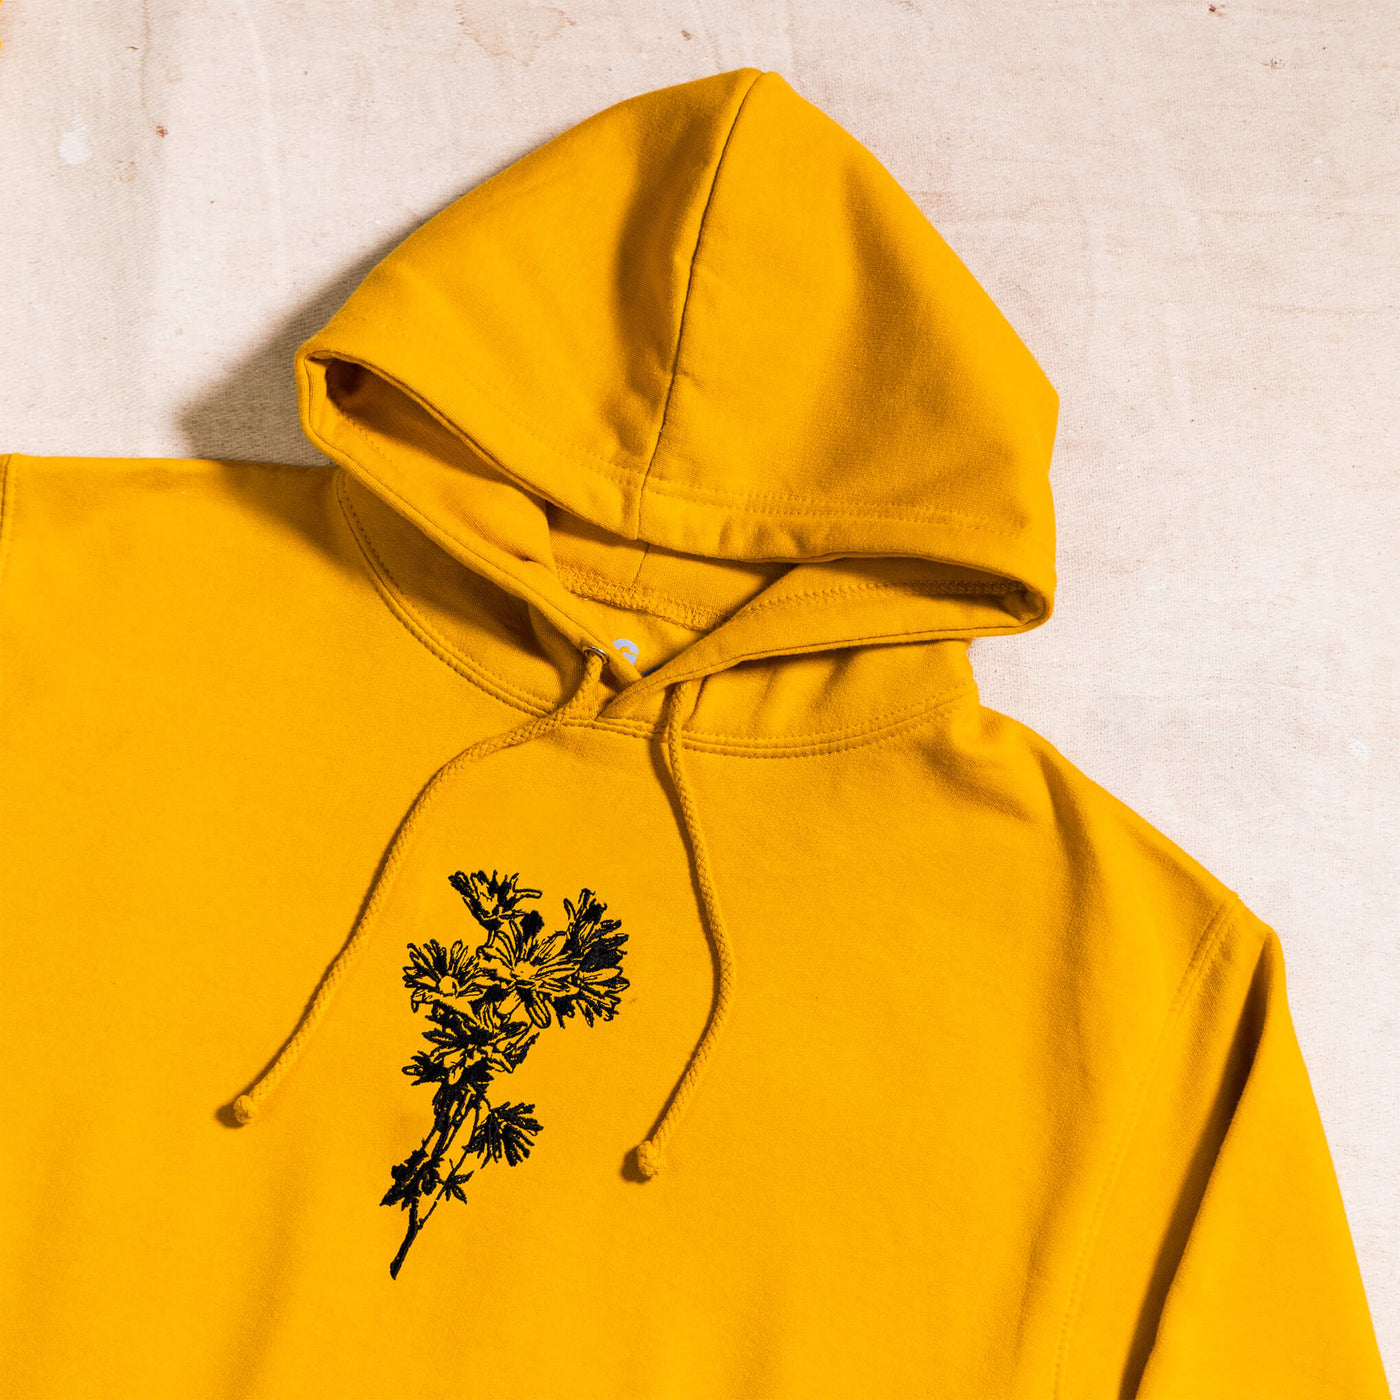 Supa Dupa Cool Embroidered Flower Hoody